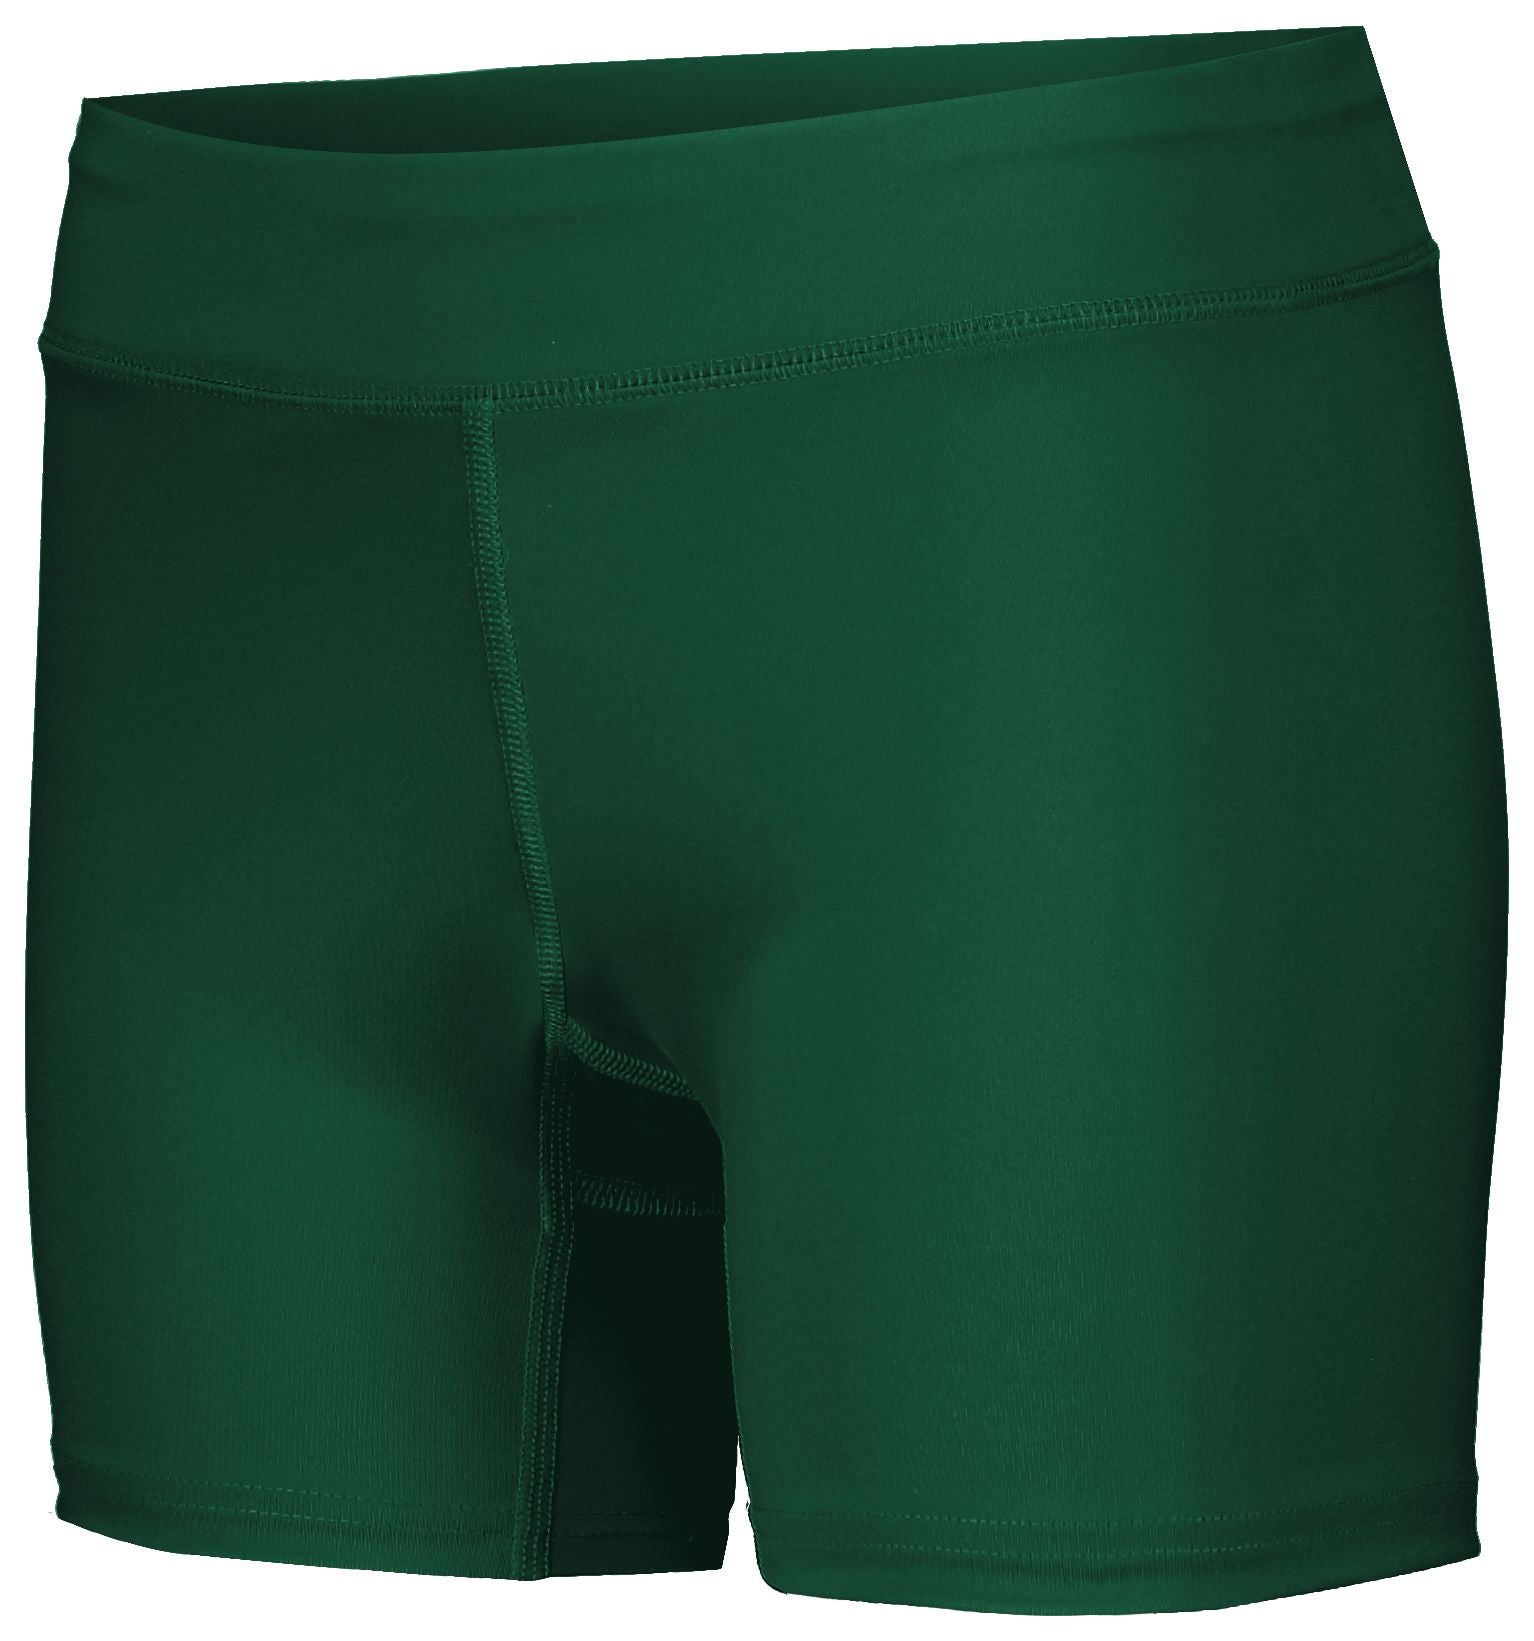 Holloway Ladies Pr Max Compression Shorts in Dark Green  -Part of the Ladies, Ladies-Shorts, Track-Field, Holloway product lines at KanaleyCreations.com